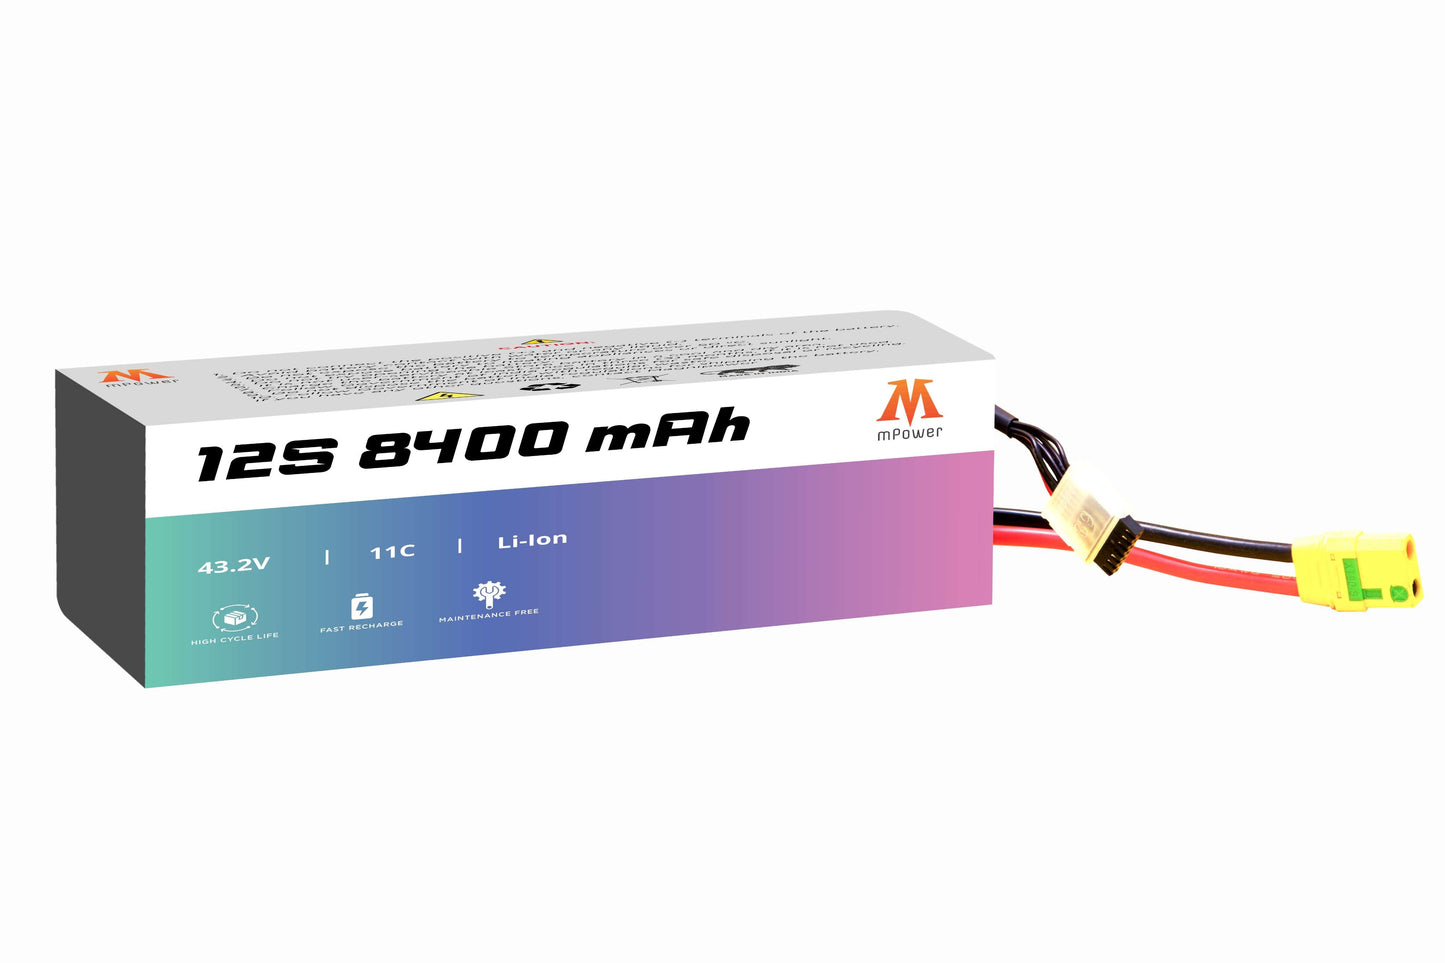 mPower 12S 8400mAh Lithium-Ion Battery for Survey Drones